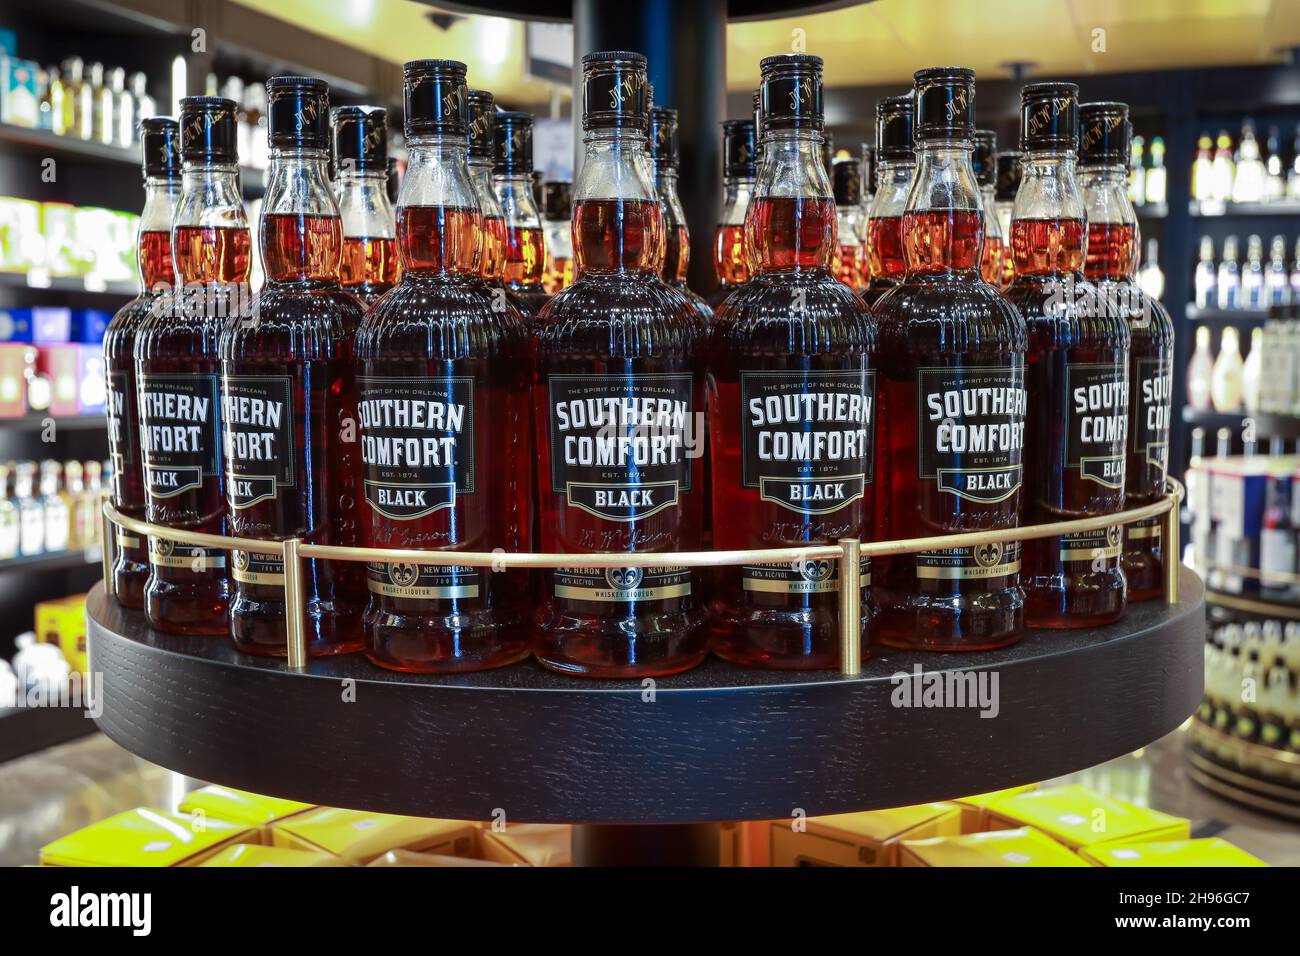 Tel-Aviv, Israel july 20, 2021: Several bottles of Southern Comfort whiskey on display at a local grocery store. Stock Photo